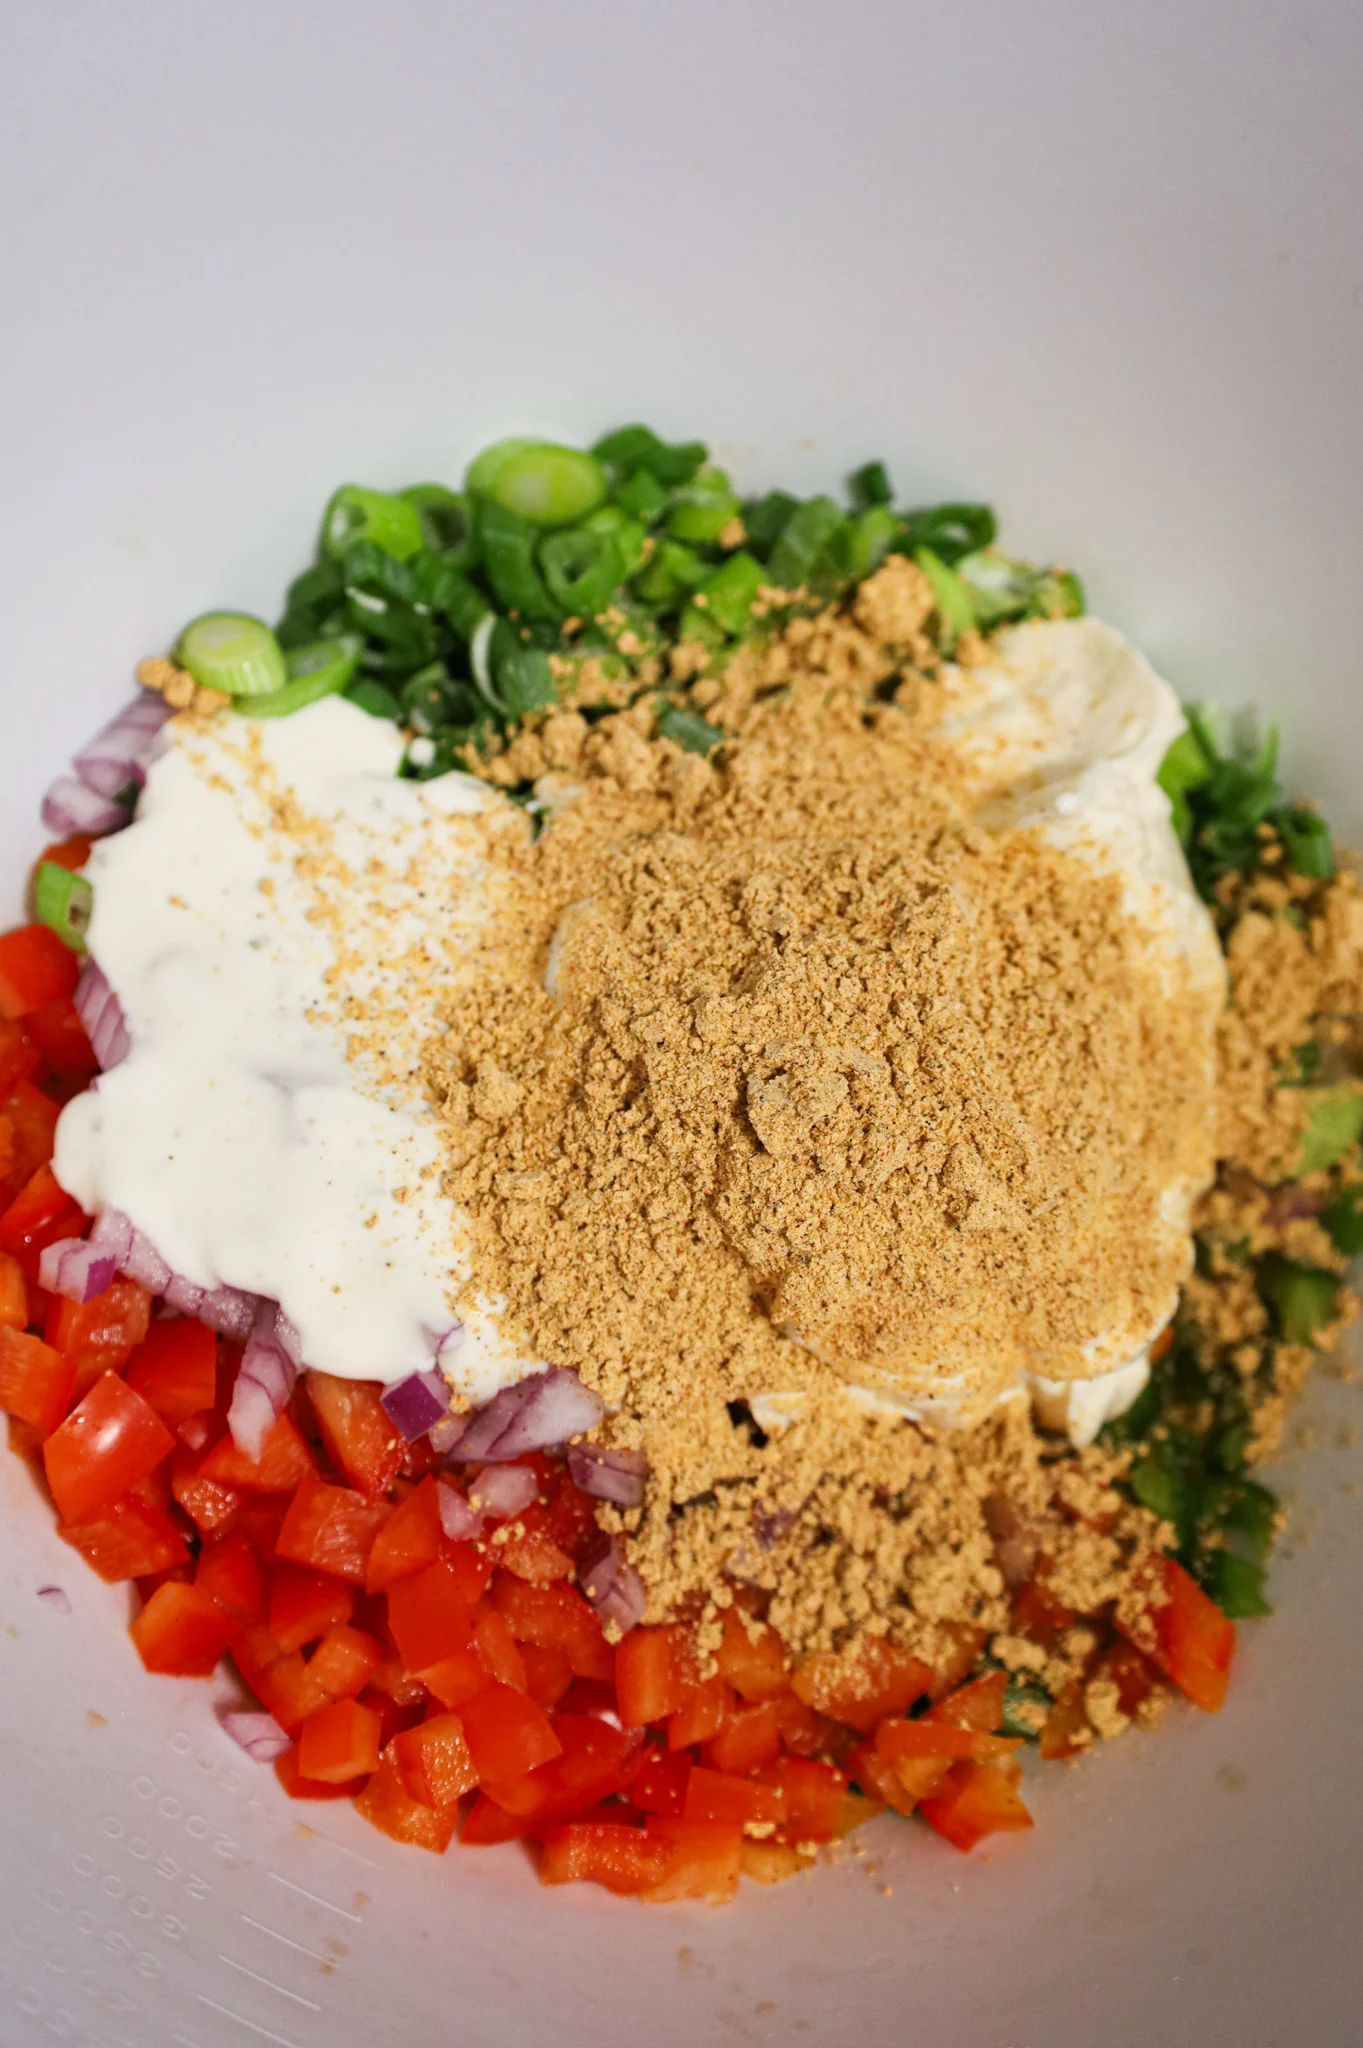 taco seasoning, mayo and ranch dressing on top of diced veggies in a mixing bowl